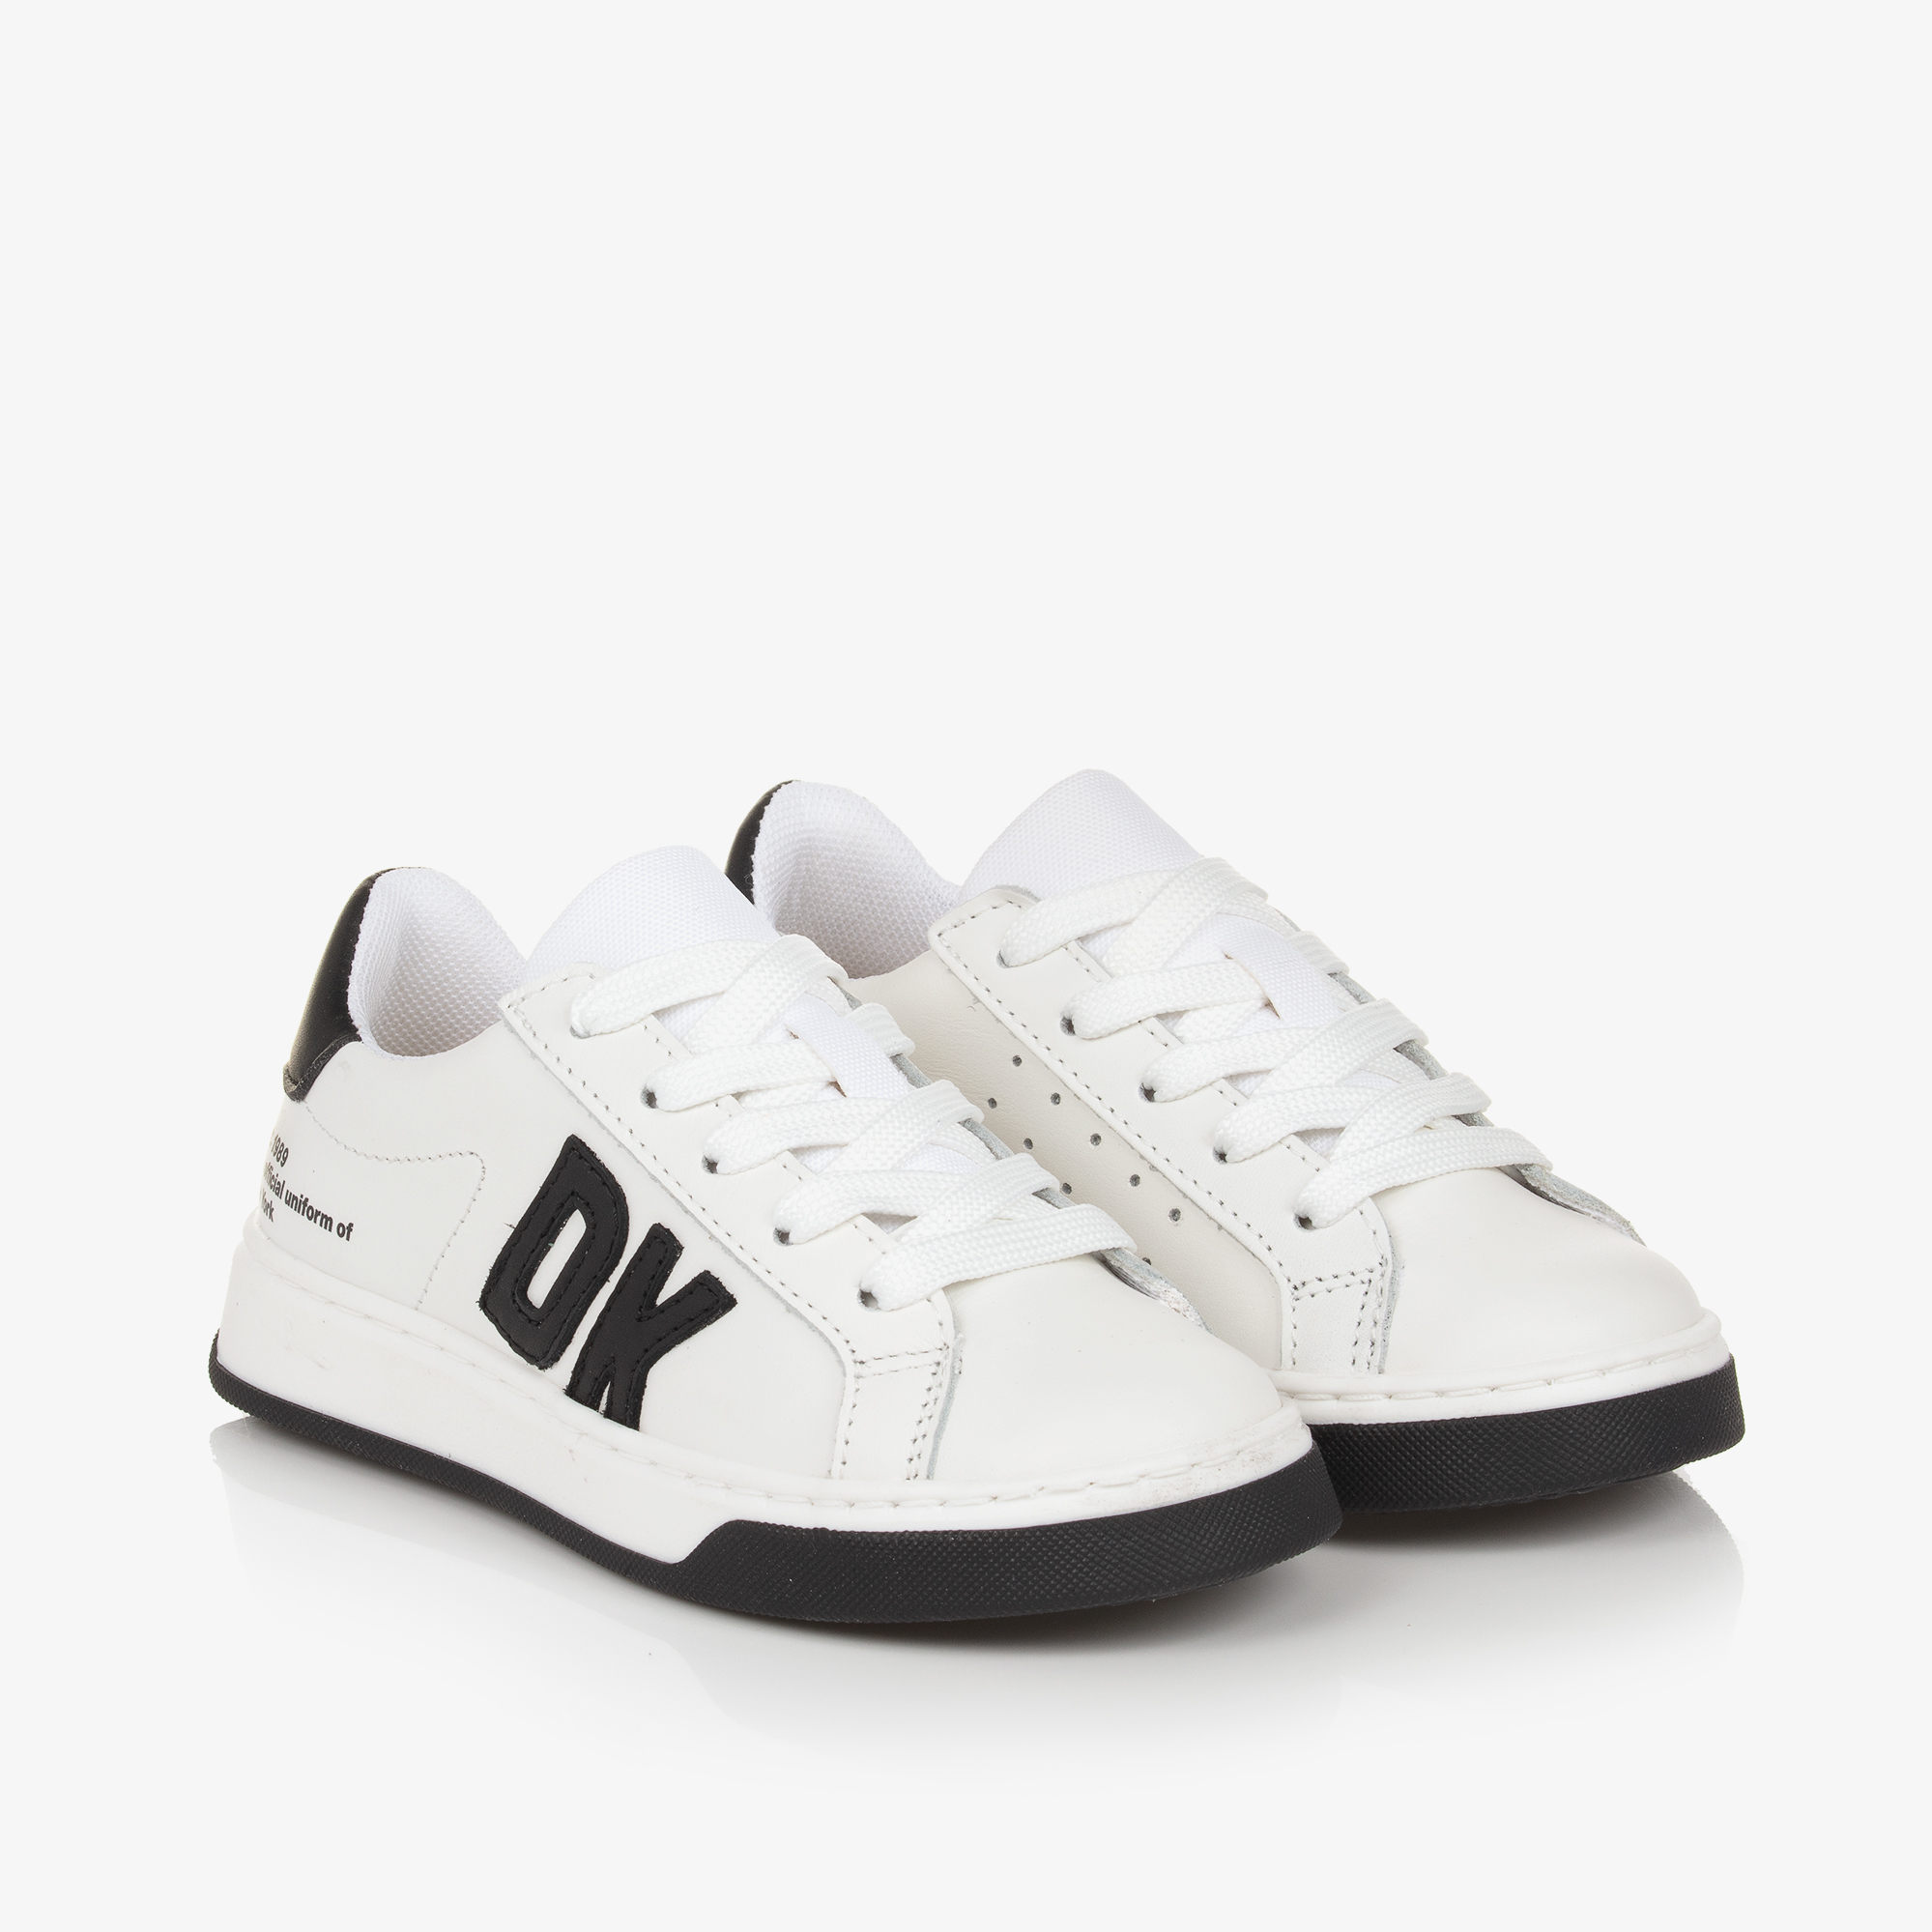 DKNY - White Leather Lace-Up Trainers